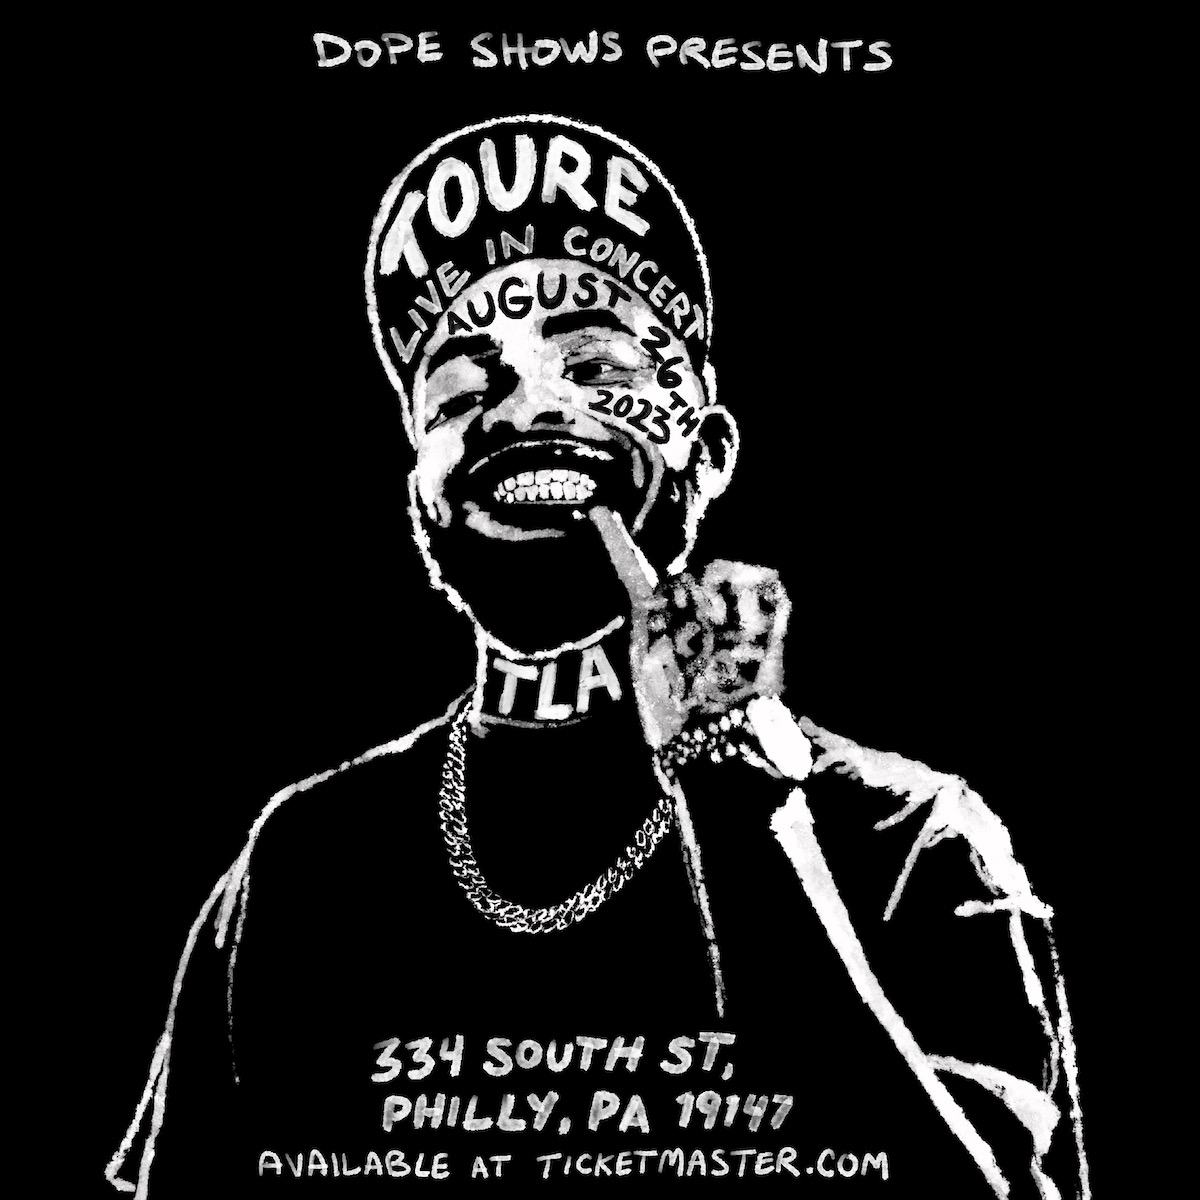 DOPE Shows founders photo and fliers for Rylo Rodriguez and Toure